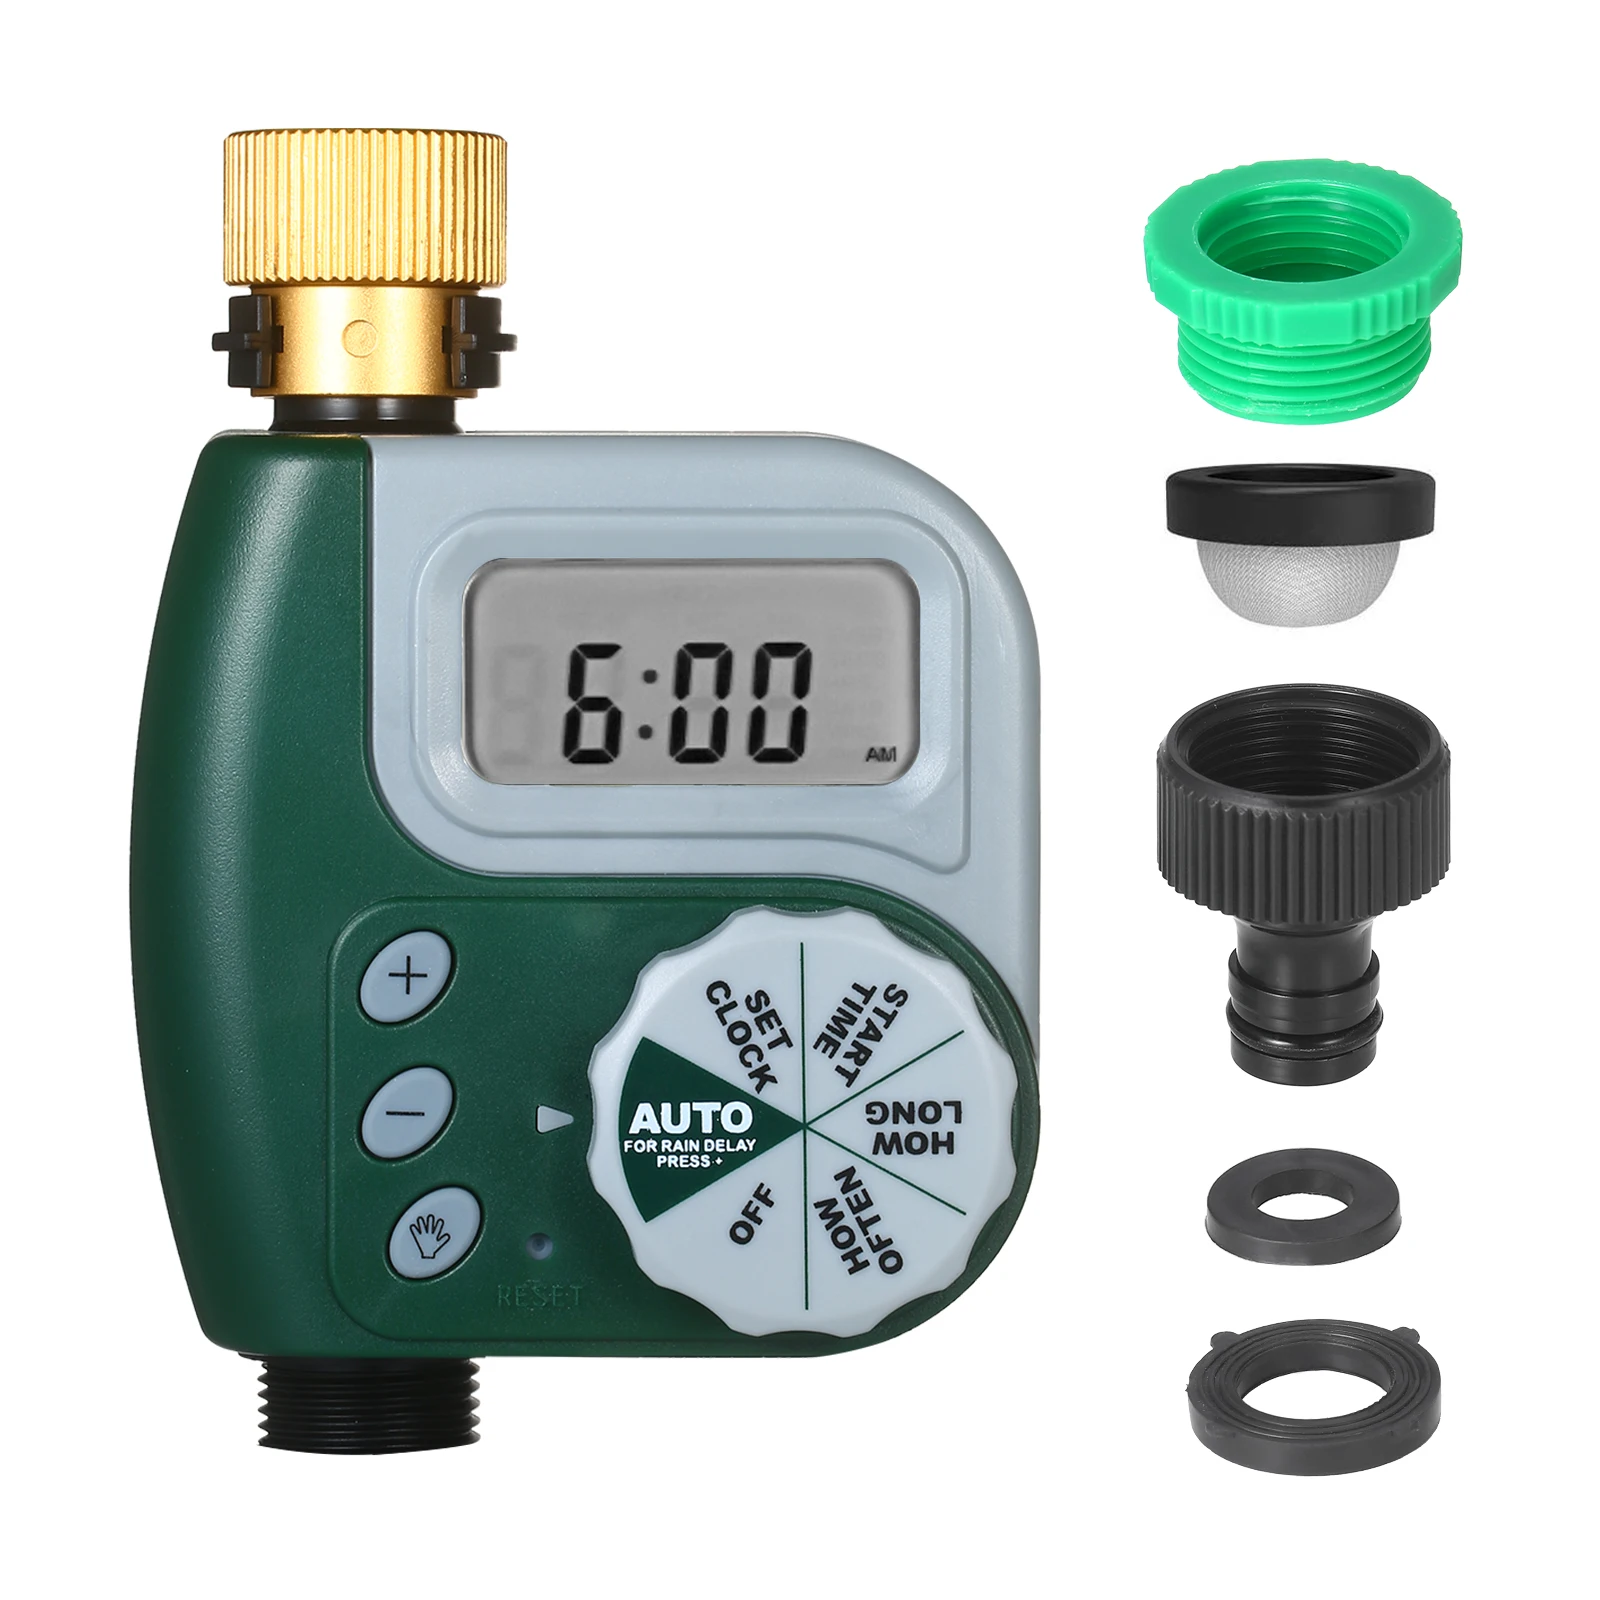 Automatic Timing Irrigation Controller Water Tap Timer Faucet Garden Waterproof 